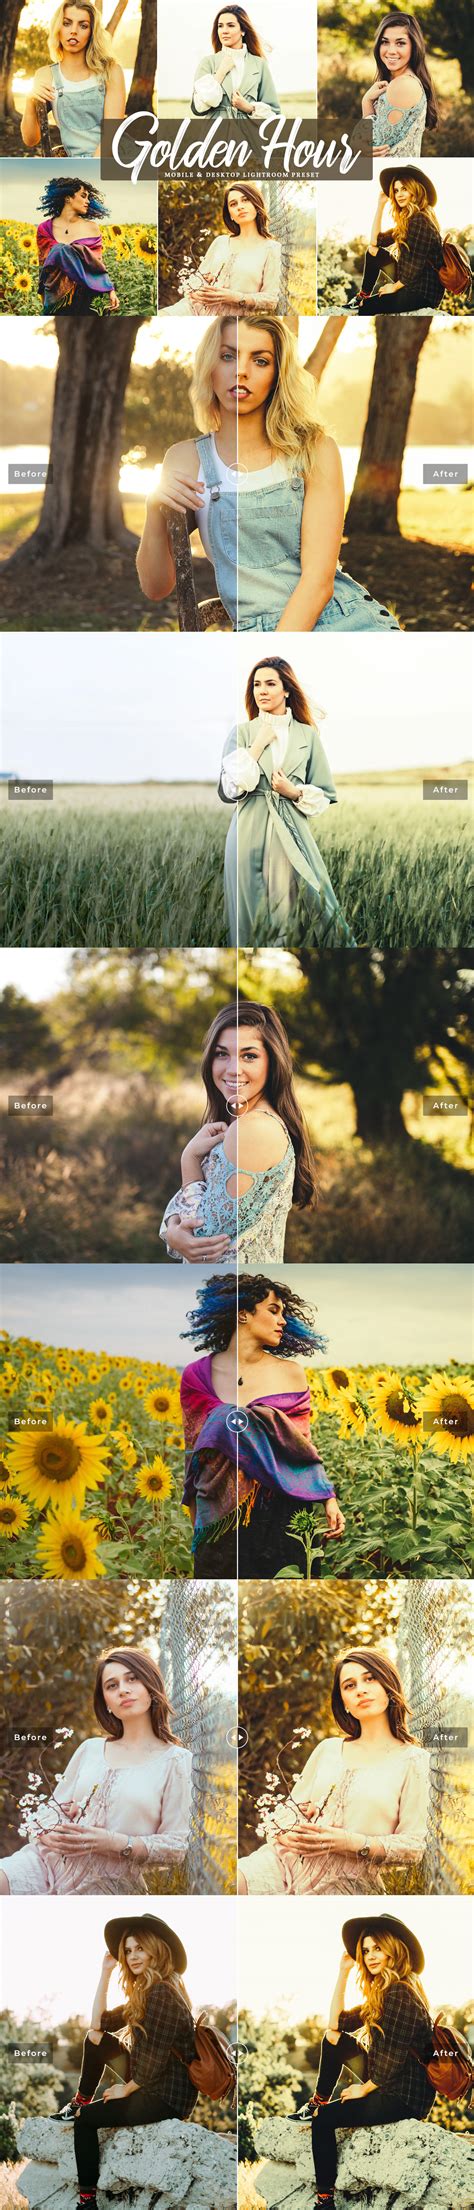 Golden hour presets that will color your photos with the most beautiful tones. Free Golden Hour Mobile & Desktop Lightroom Preset on Behance